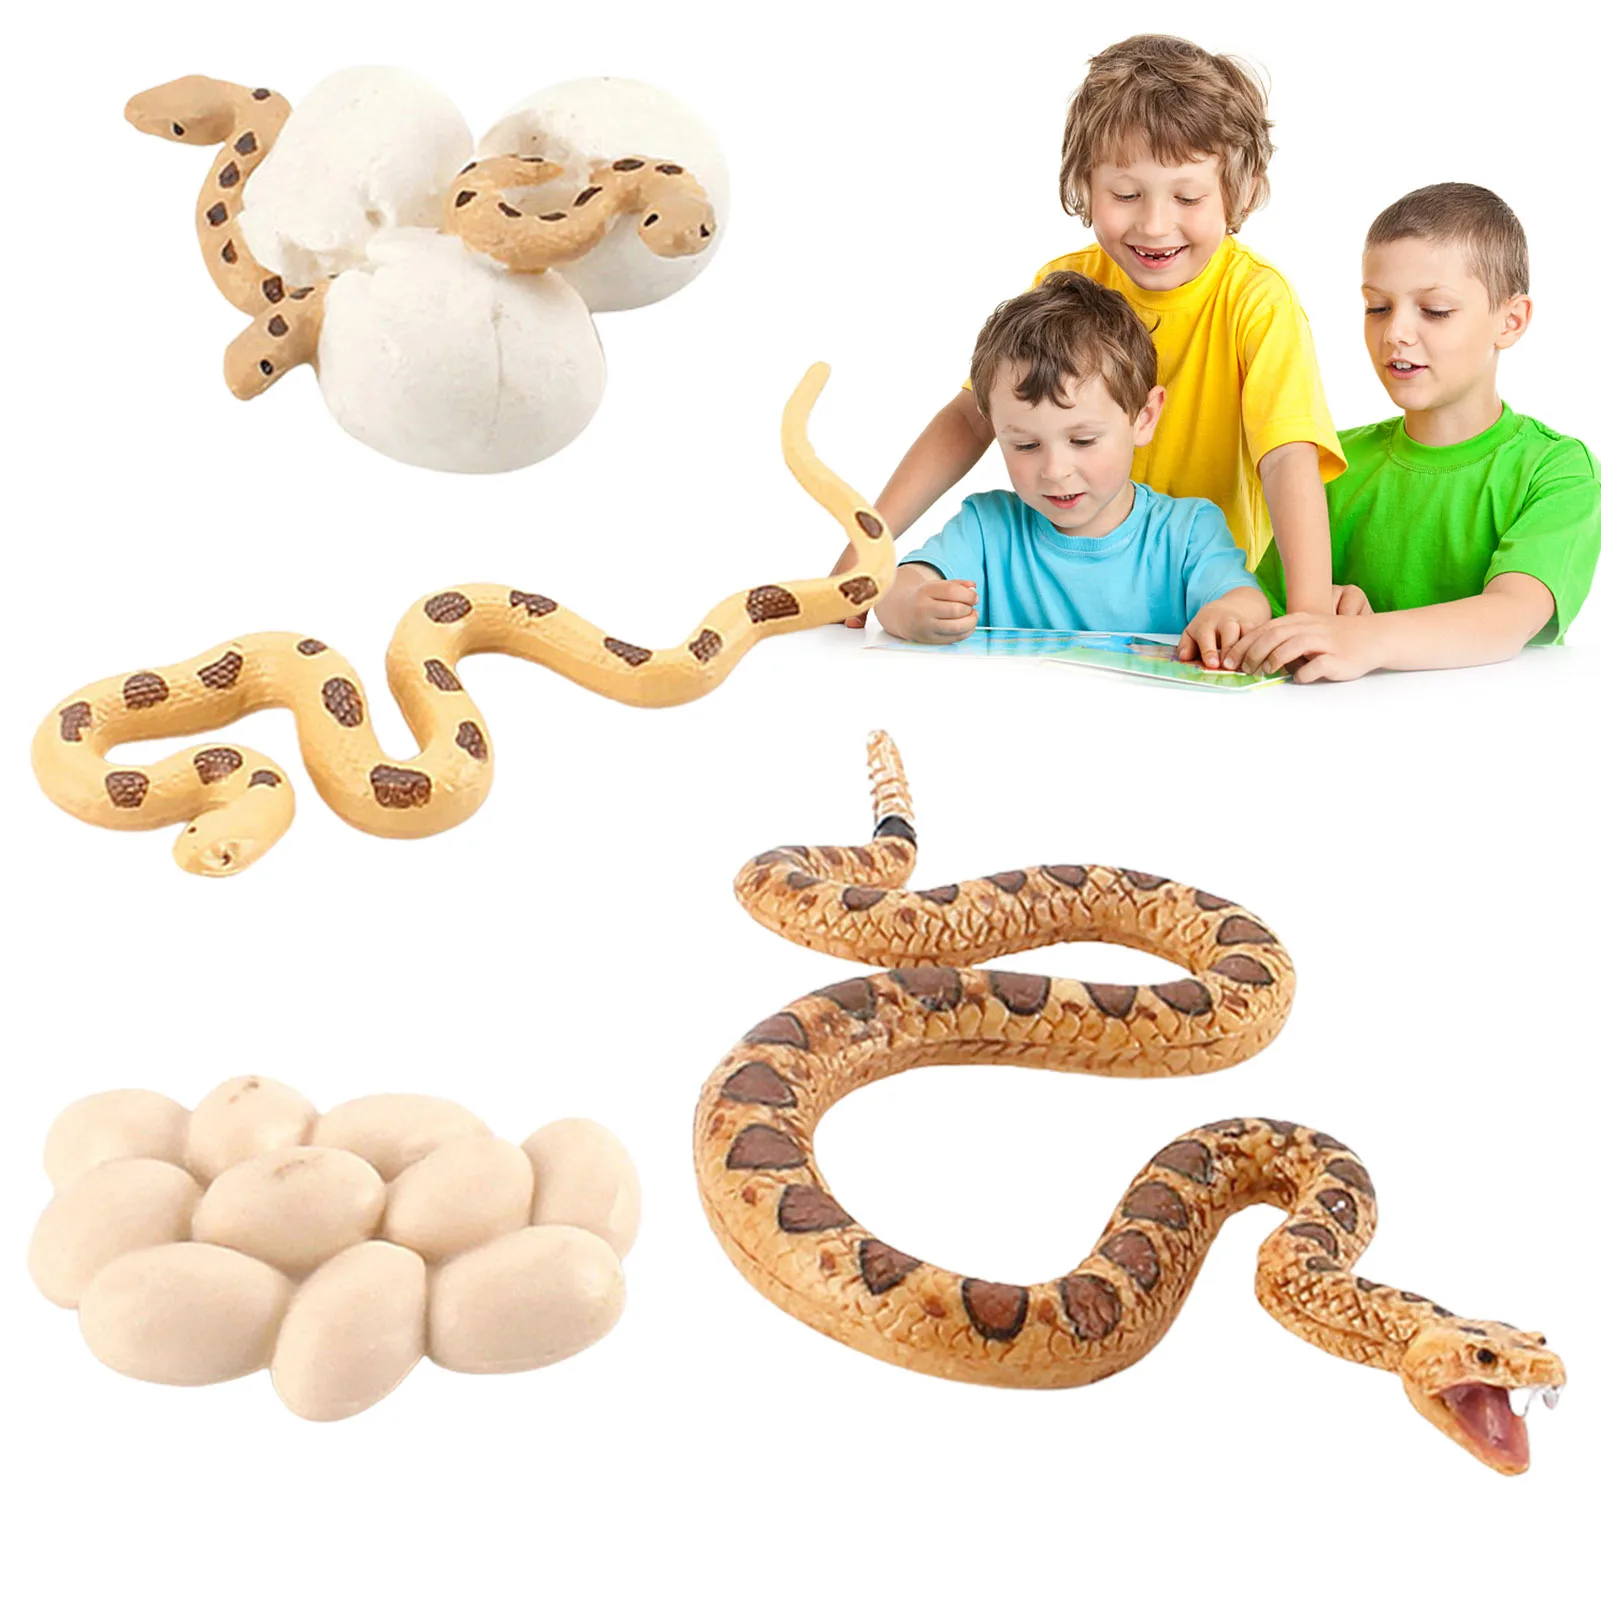 

Snake Growth Cycle Biological Model Toy Snake Model Figure Children Learning Teaching Aids Including Snake Eggs Hatching Snake